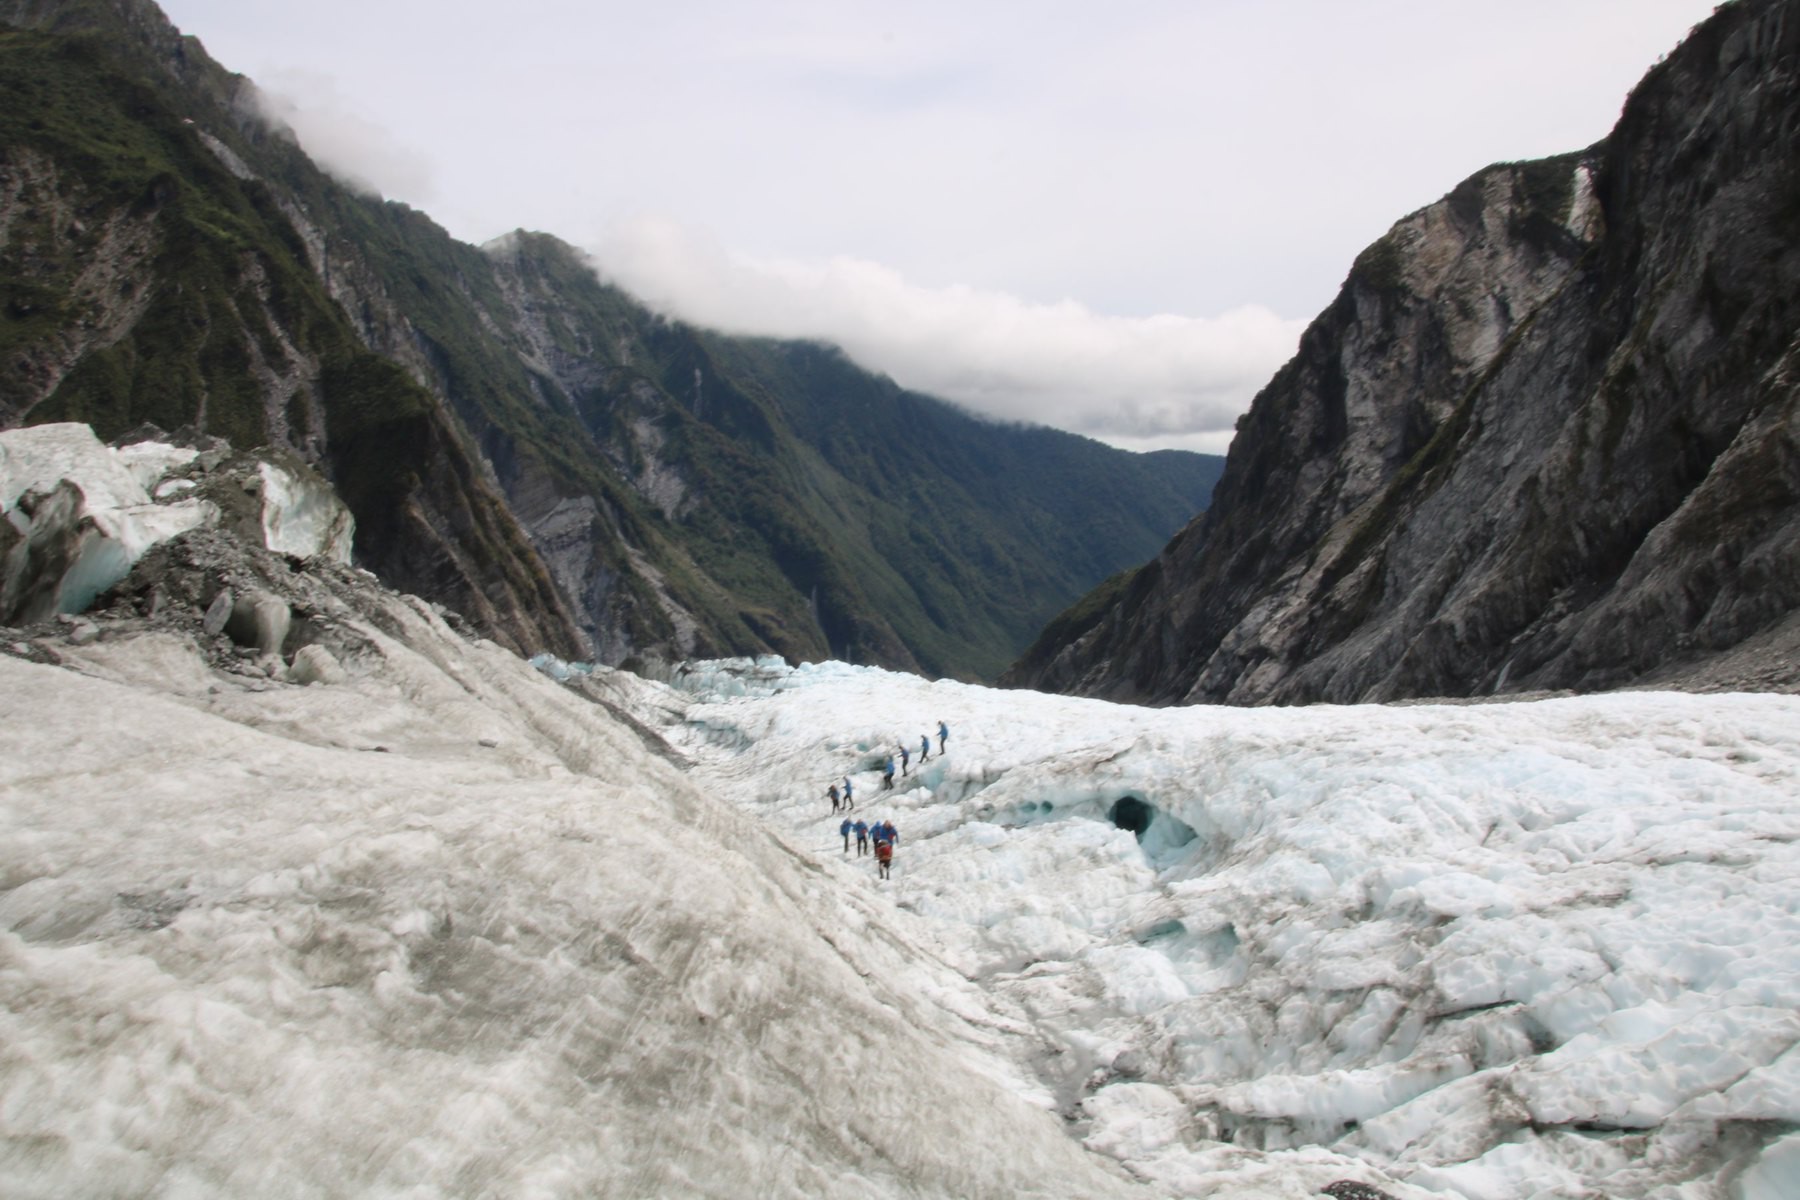 a group of people on a glacier. mountains in the background